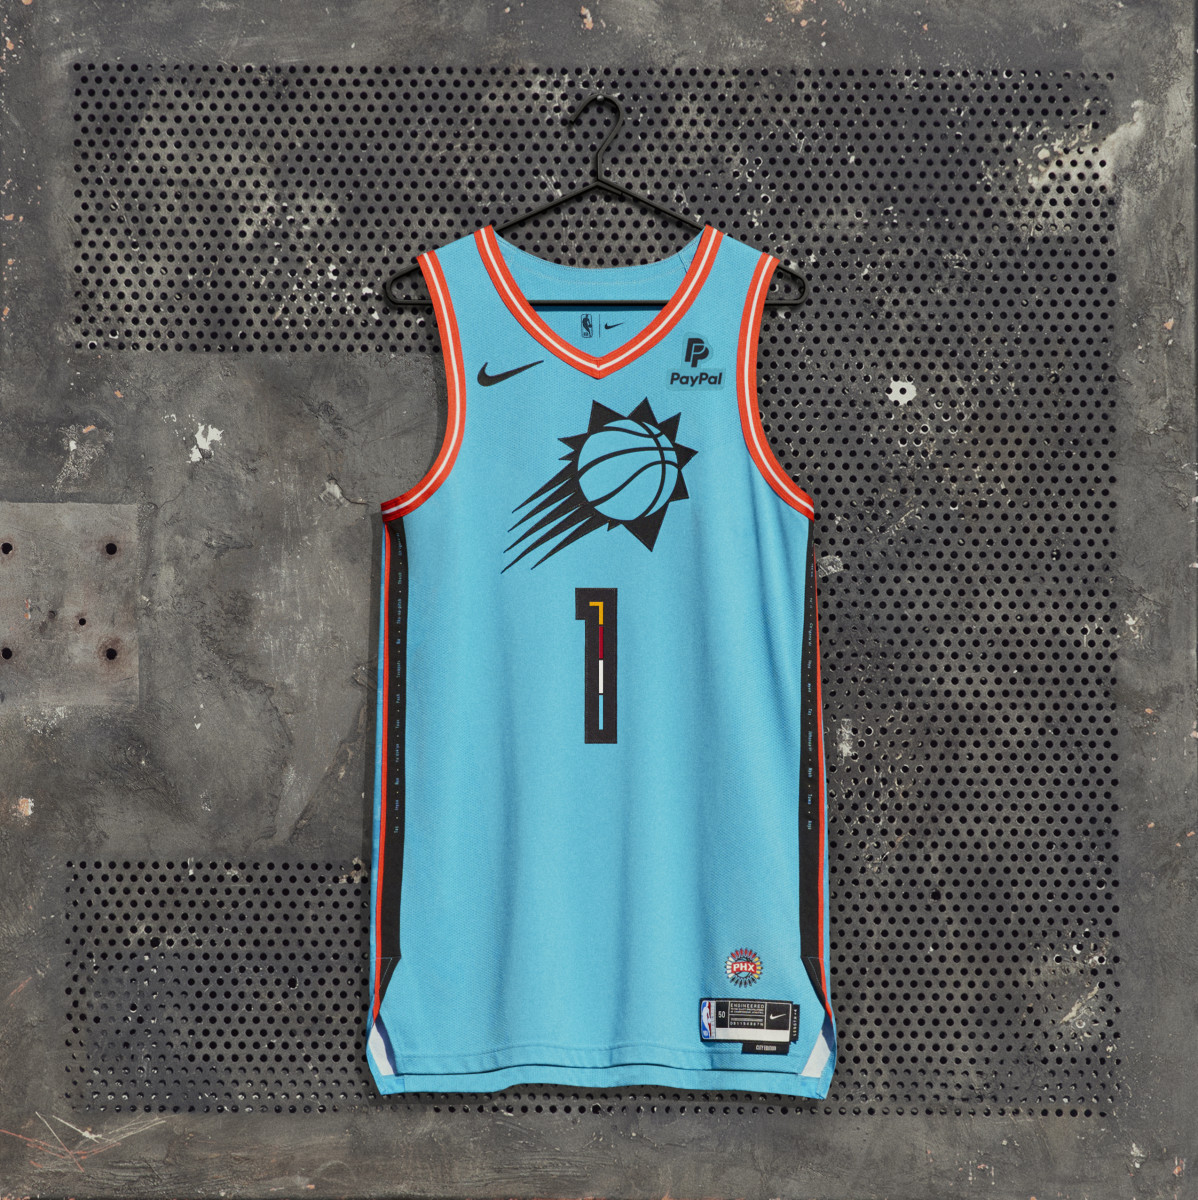 NBA City Edition Jerseys 2021, Ranked by Tiers